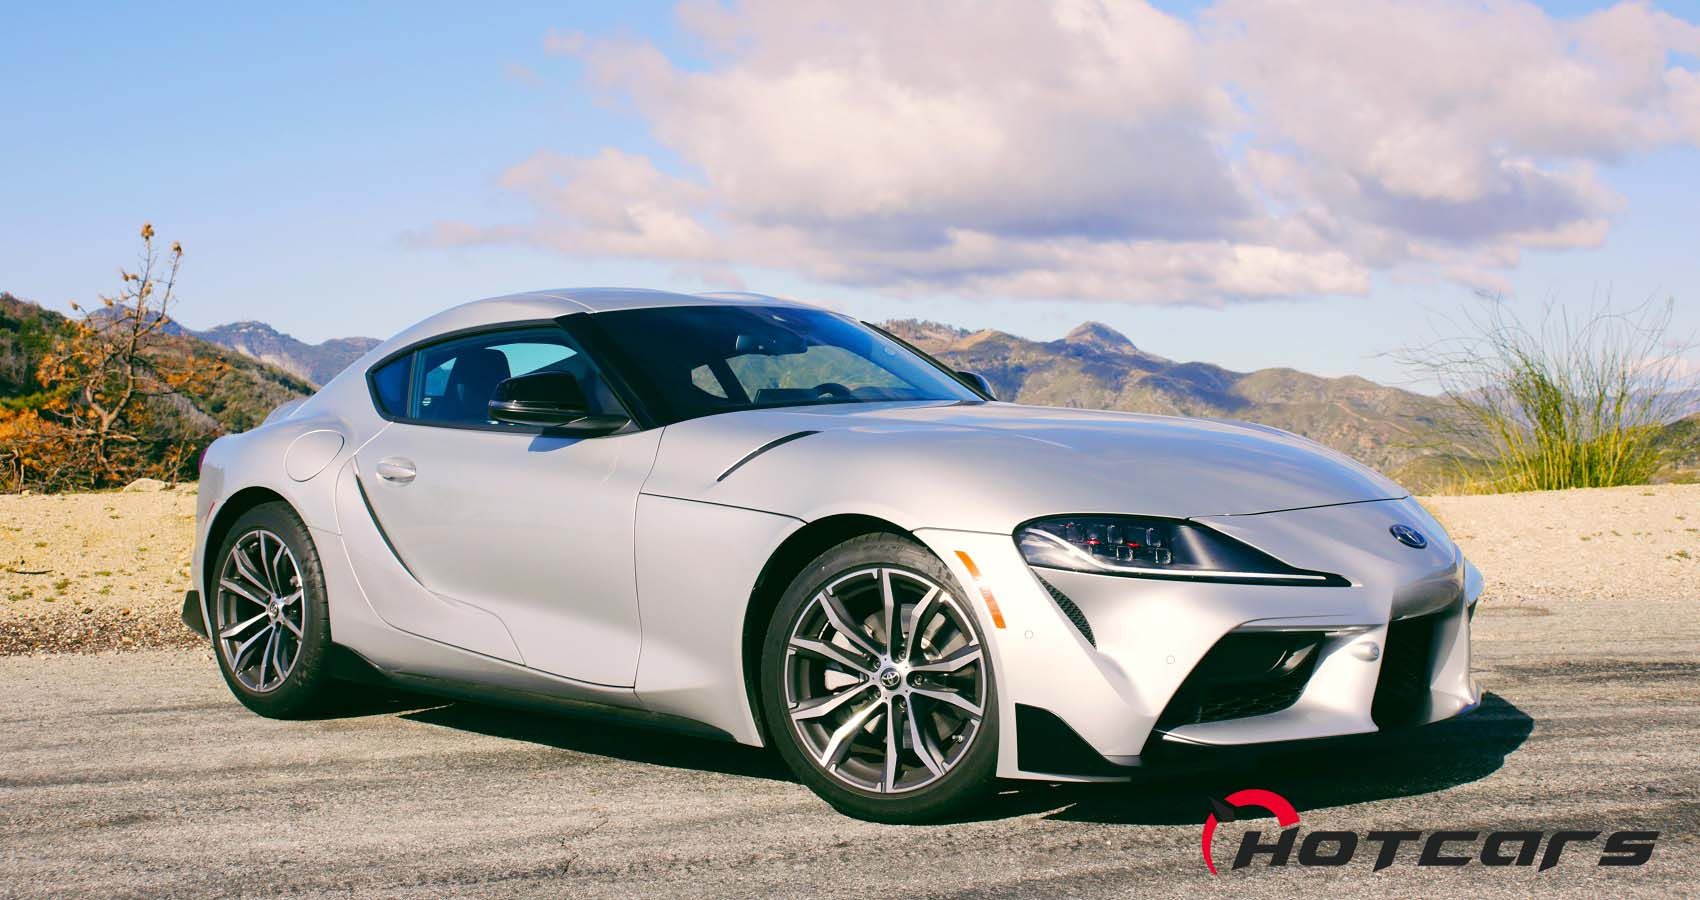 2022 Toyota GR Supra 2.0 Review: Delivering Underrated Sports Car Thrills  And Value